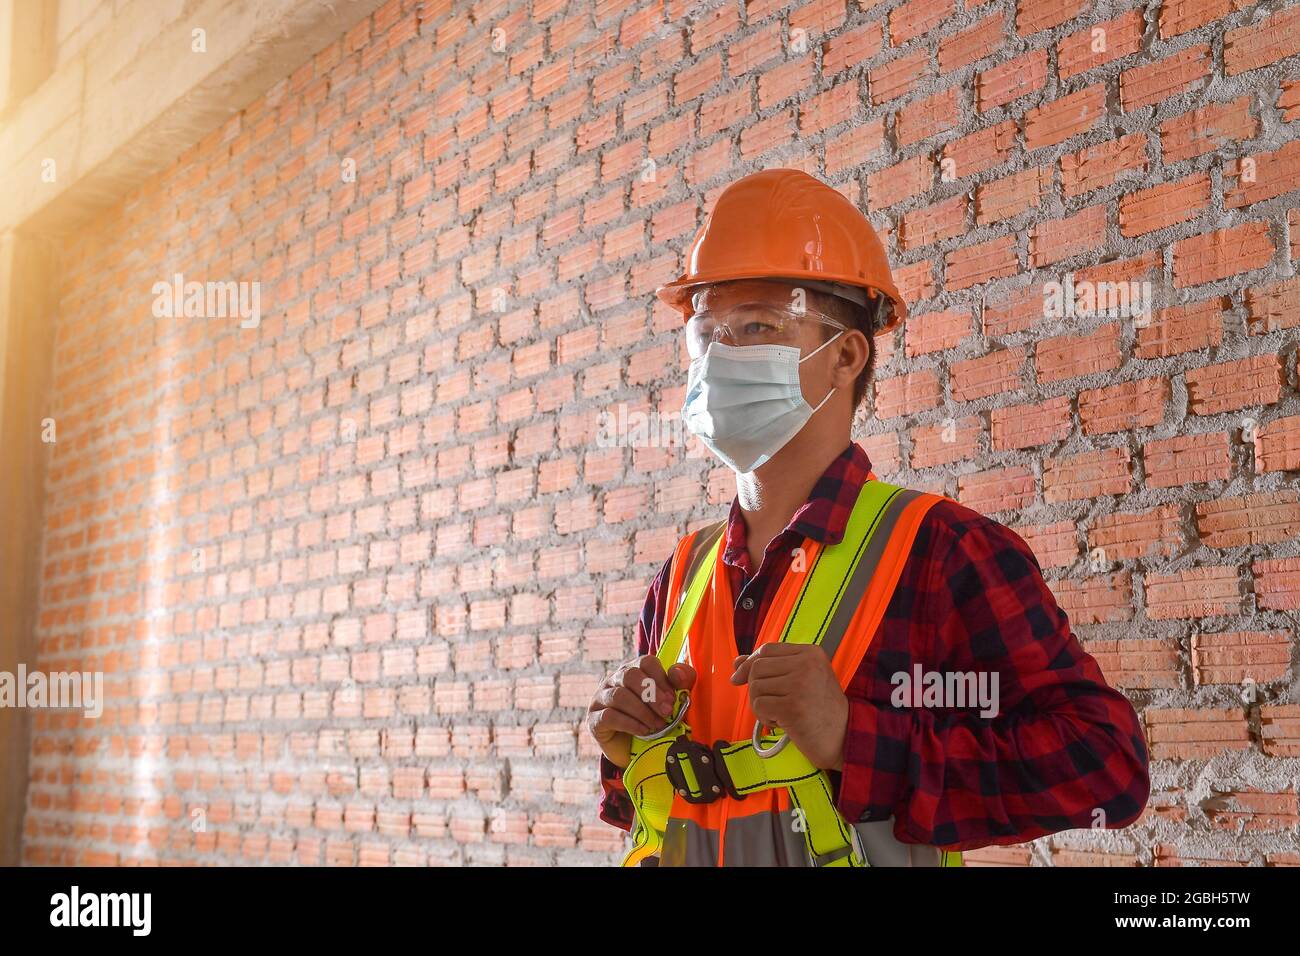 Portrait of a construction worker wearing a protective face mask, hard hat and reflective clothing, Thailand Stock Photo